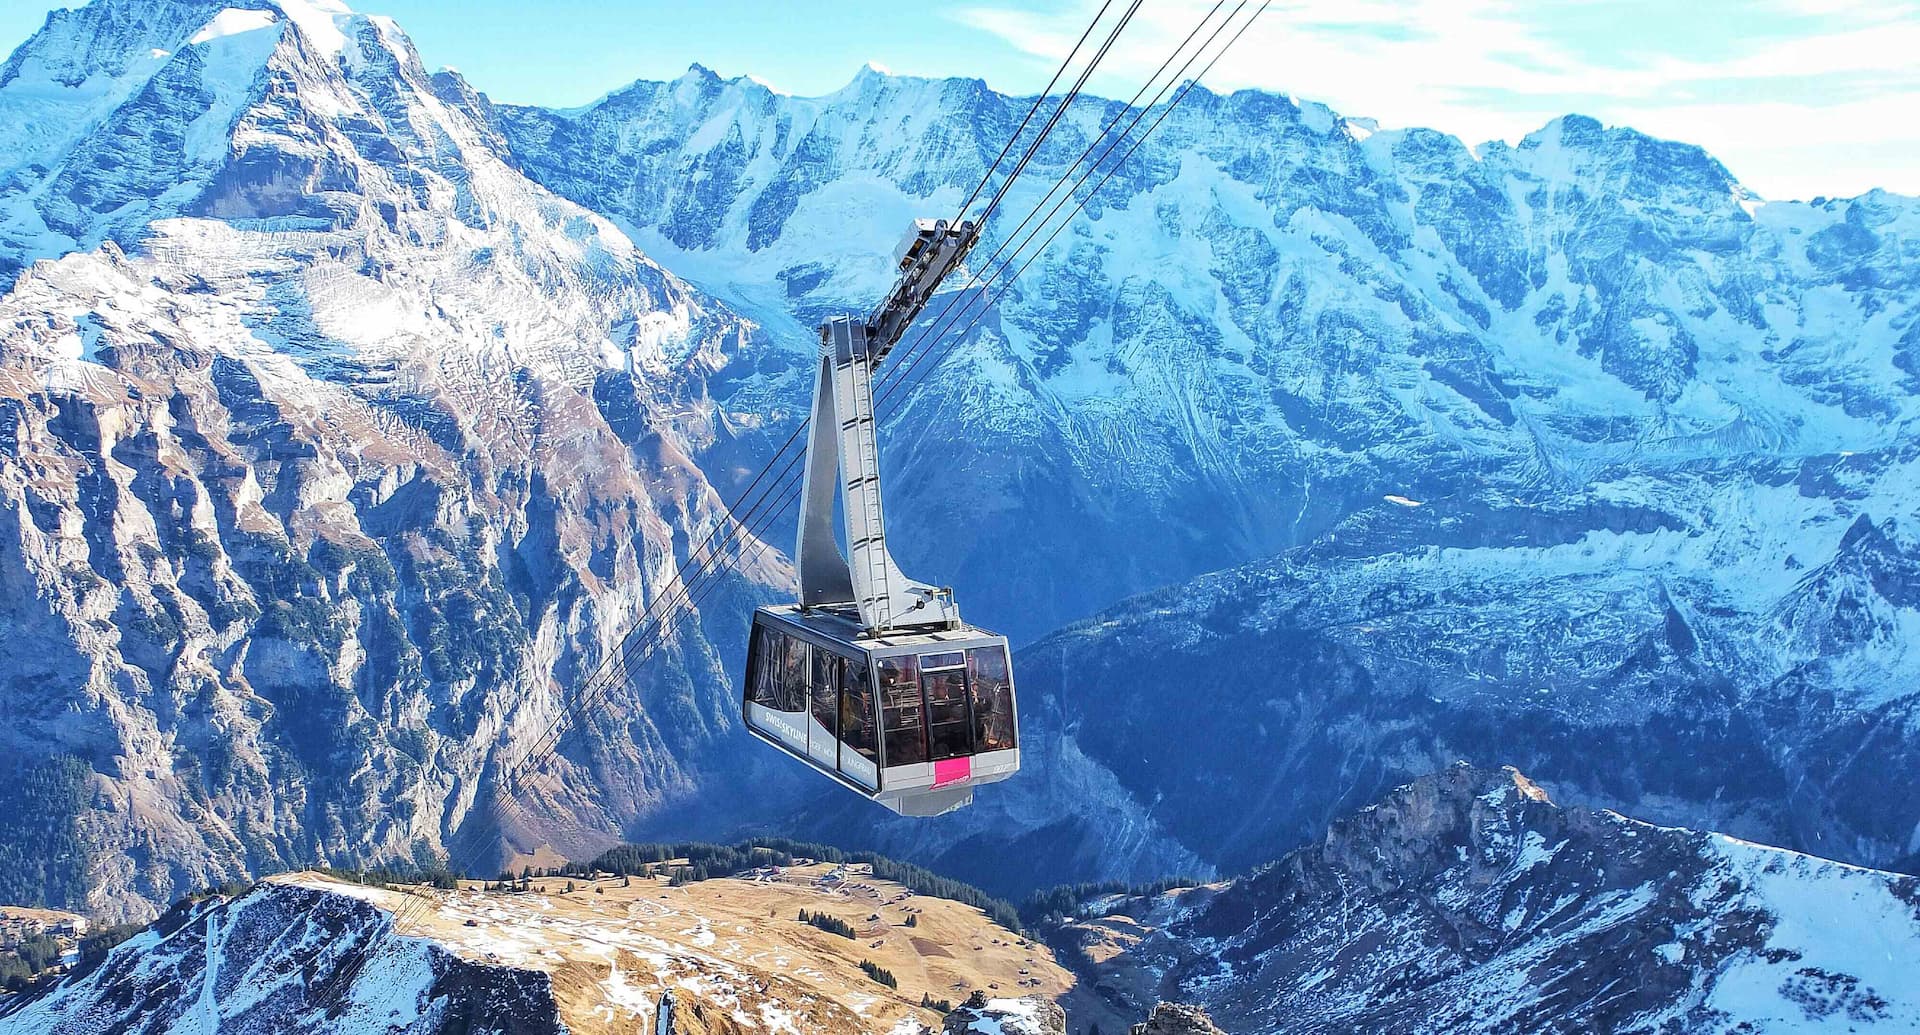 Cable car system above snowy mountain peaks